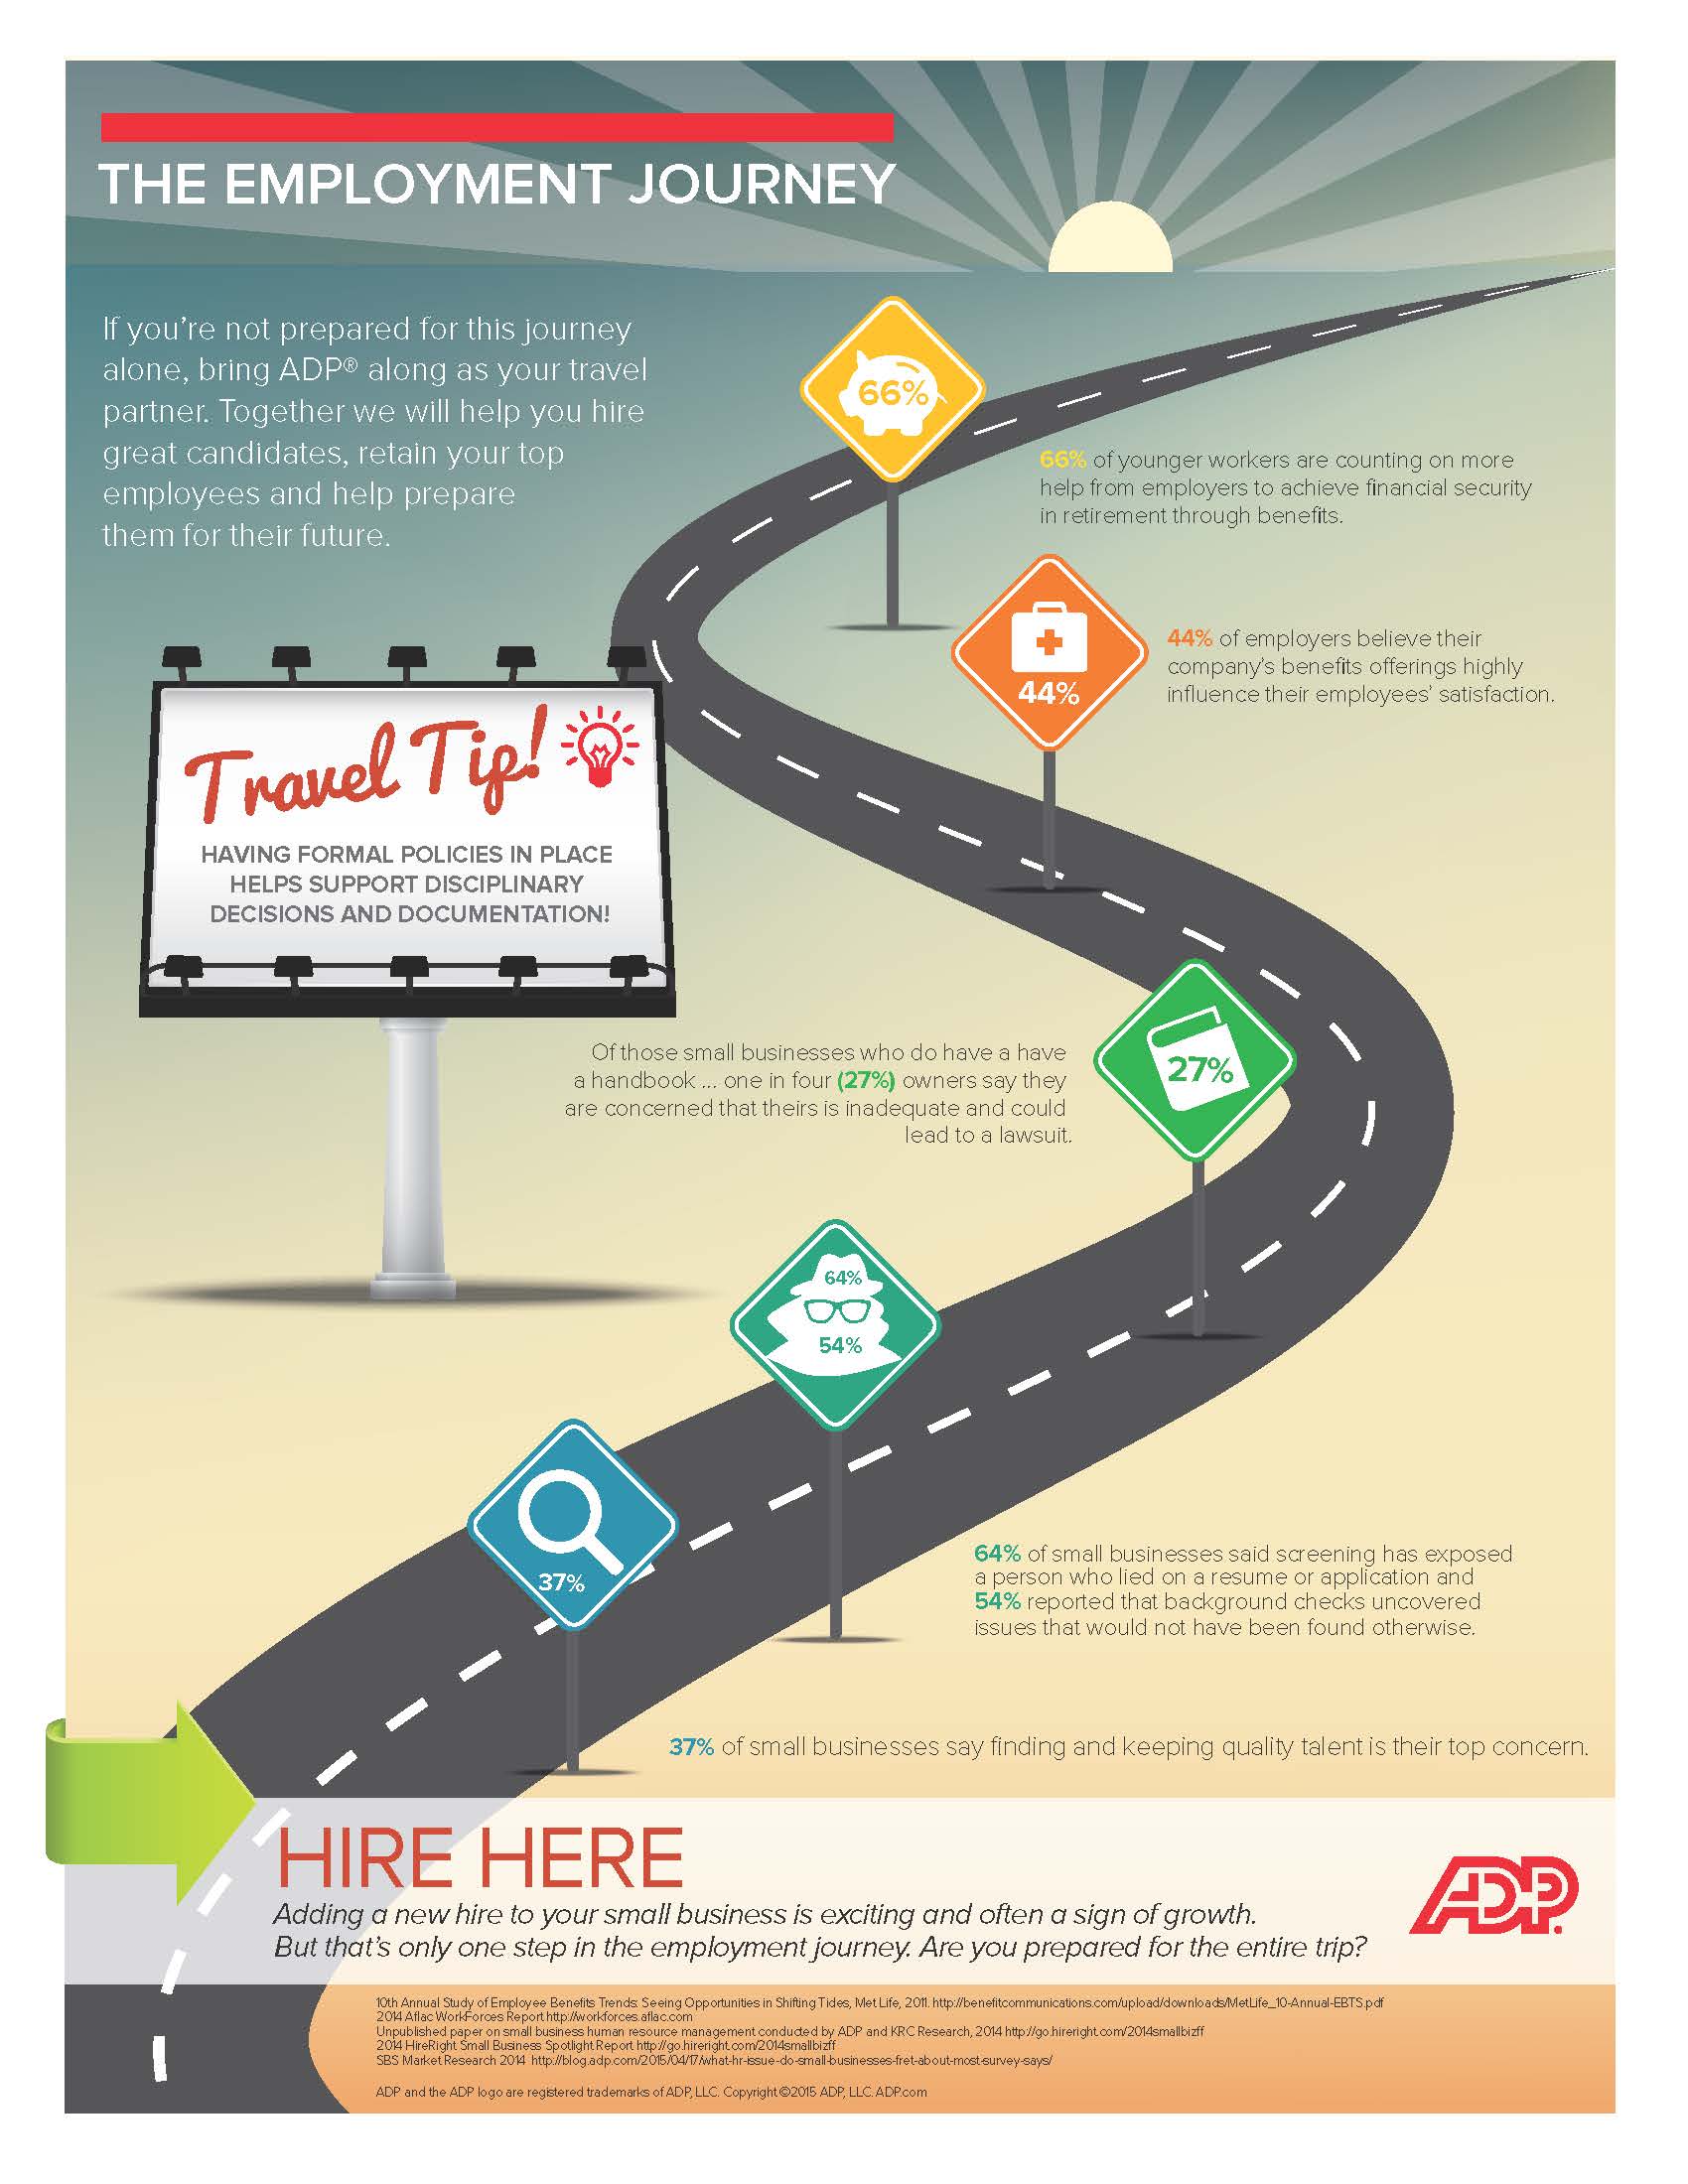 The Employment Journey infographic